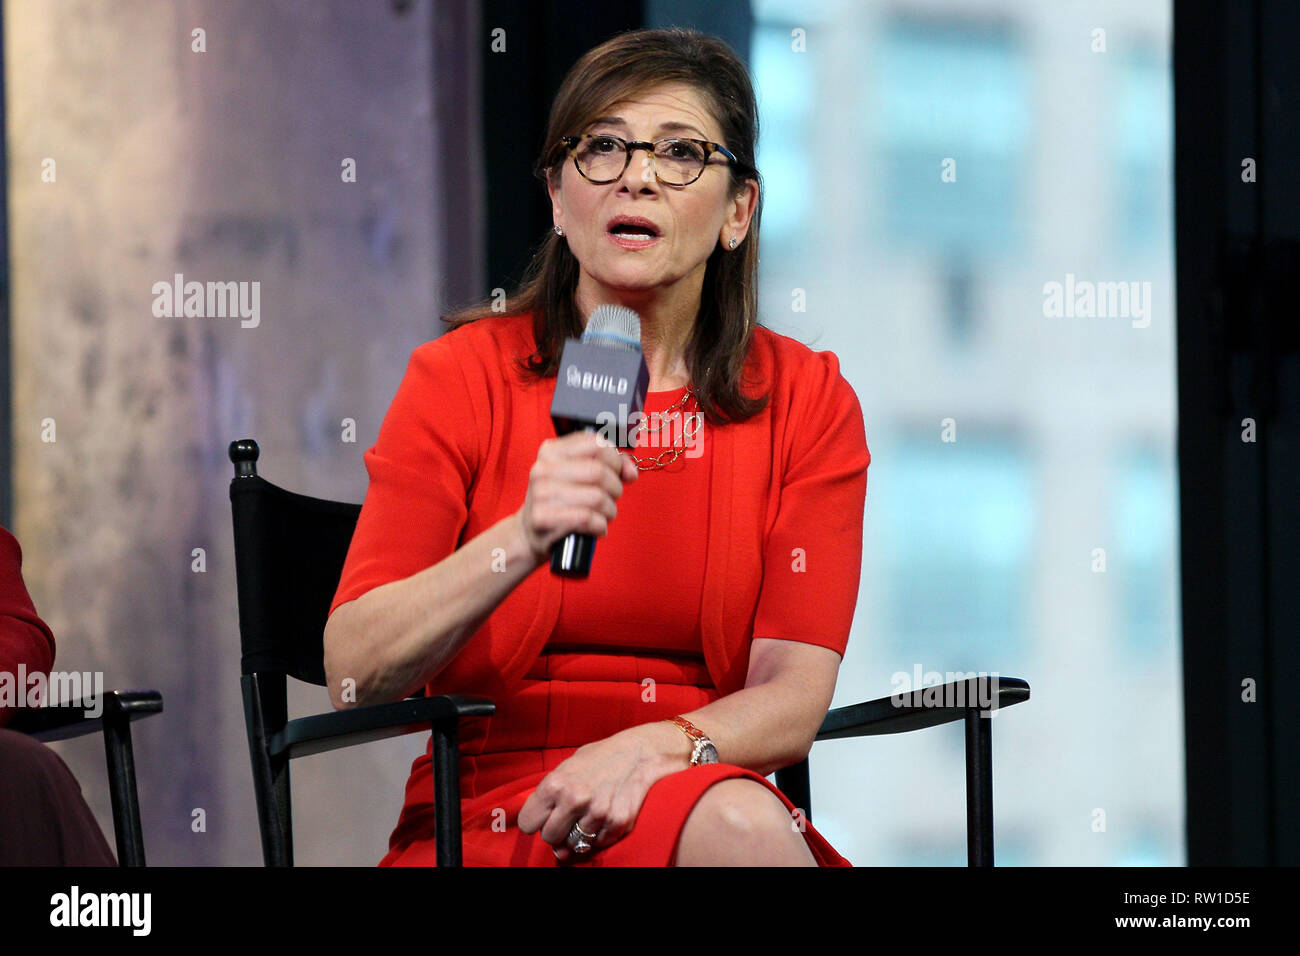 New York, USA. 05 Apr, 2016. Chairman of CBS Entertainment, Nina Tassler at The Tuesday, Apr 5, 2016 AOL BUILD Series discussing 'What I Told My Daughter: Lessons From Leaders On Raising The Next Generation Of Empowered Women' at AOL Studios In New York in New York, USA. Credit: Steve Mack/S.D. Mack Pictures/Alamy Stock Photo